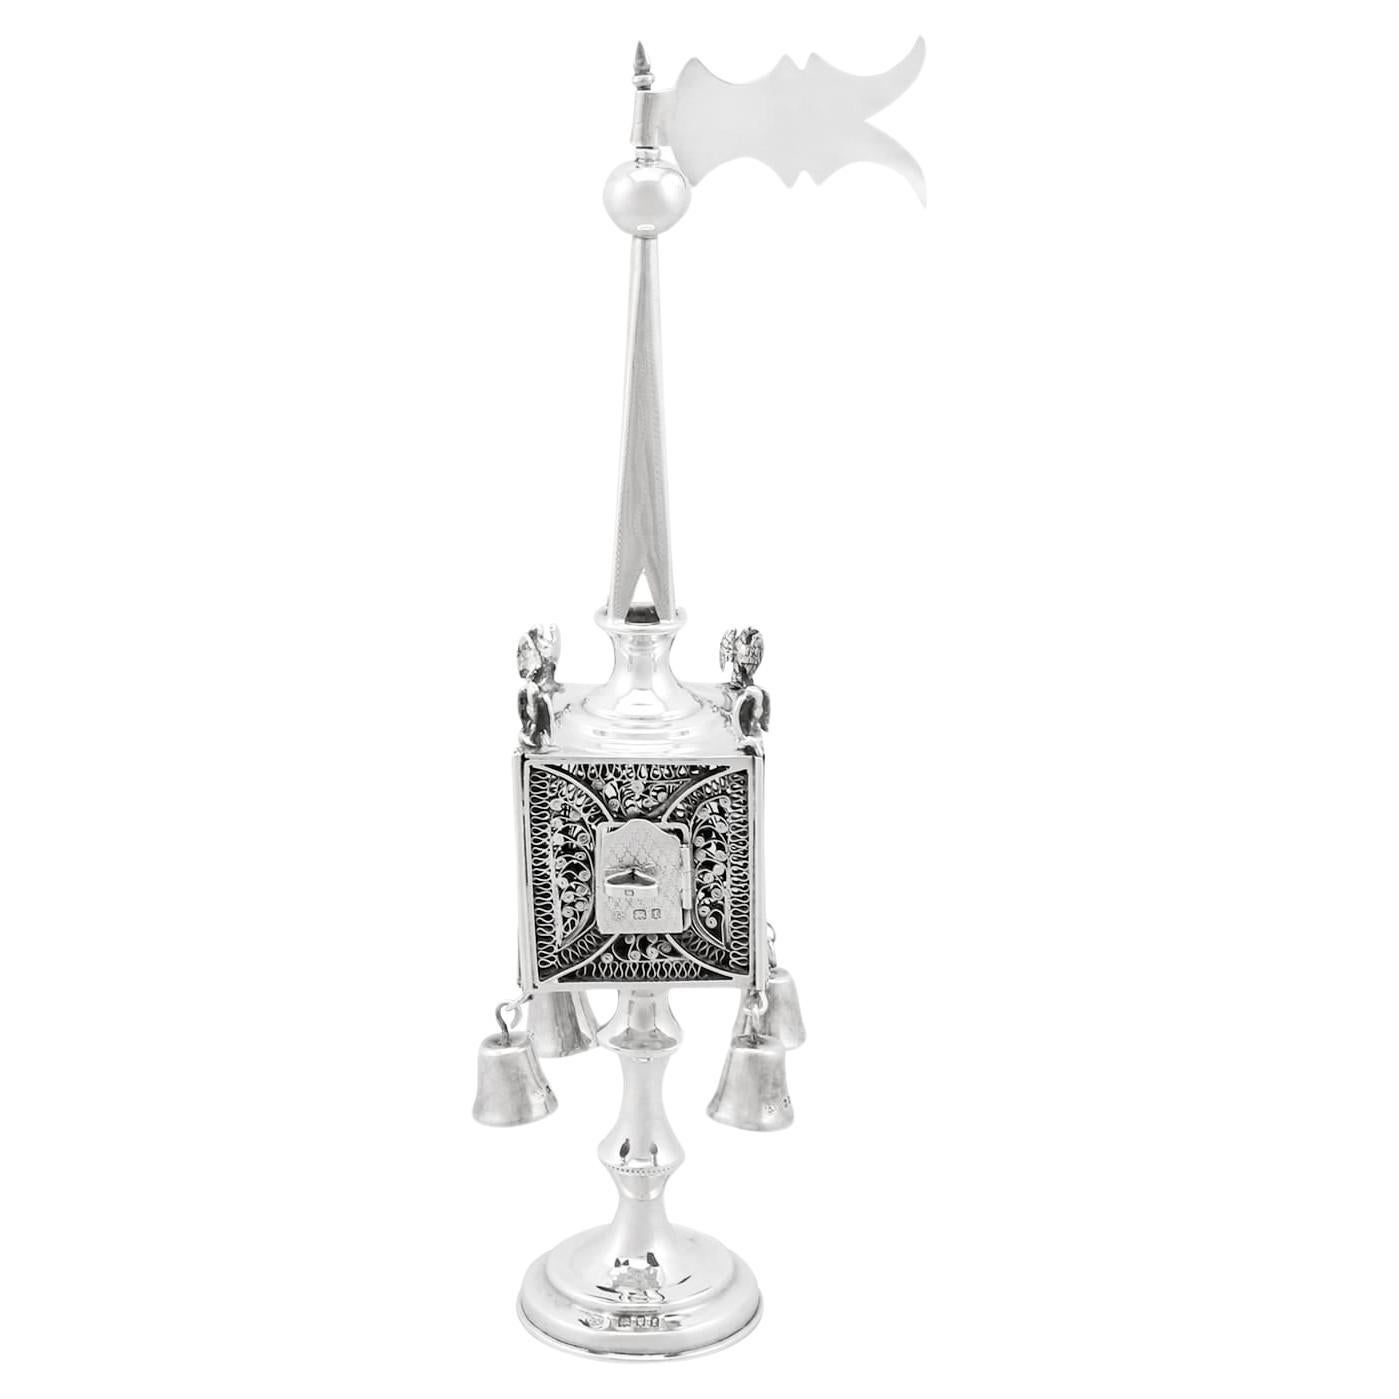 1921 Sterling Silver Spice Tower For Sale